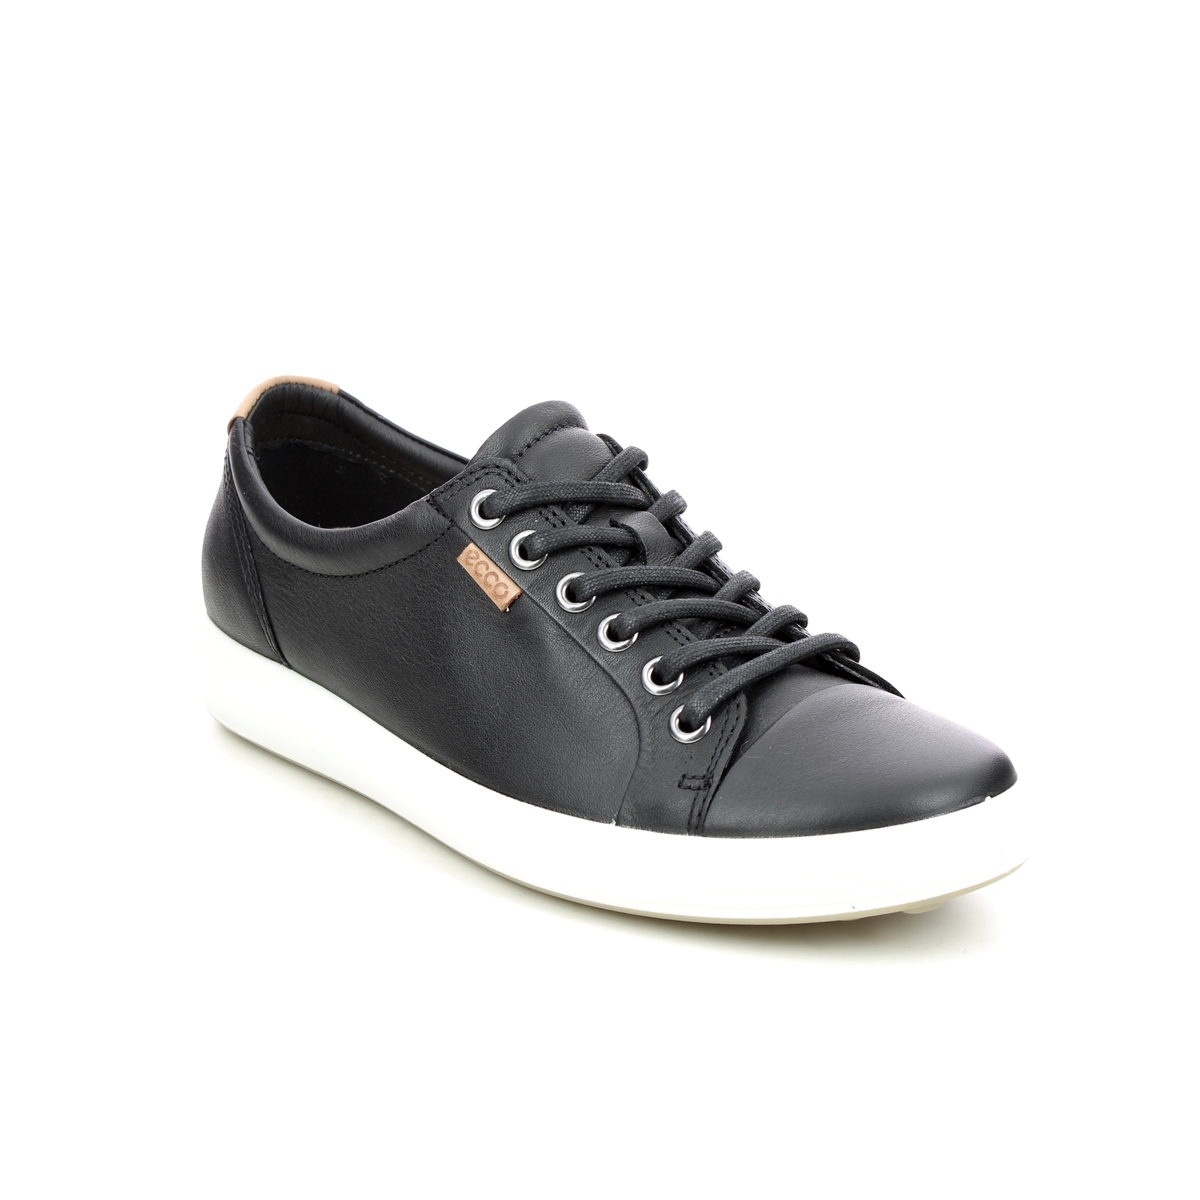 Ecco Soft 7 Lace Black Leather Womens Trainers 430003-01001 In Size 41 In Plain Black Leather